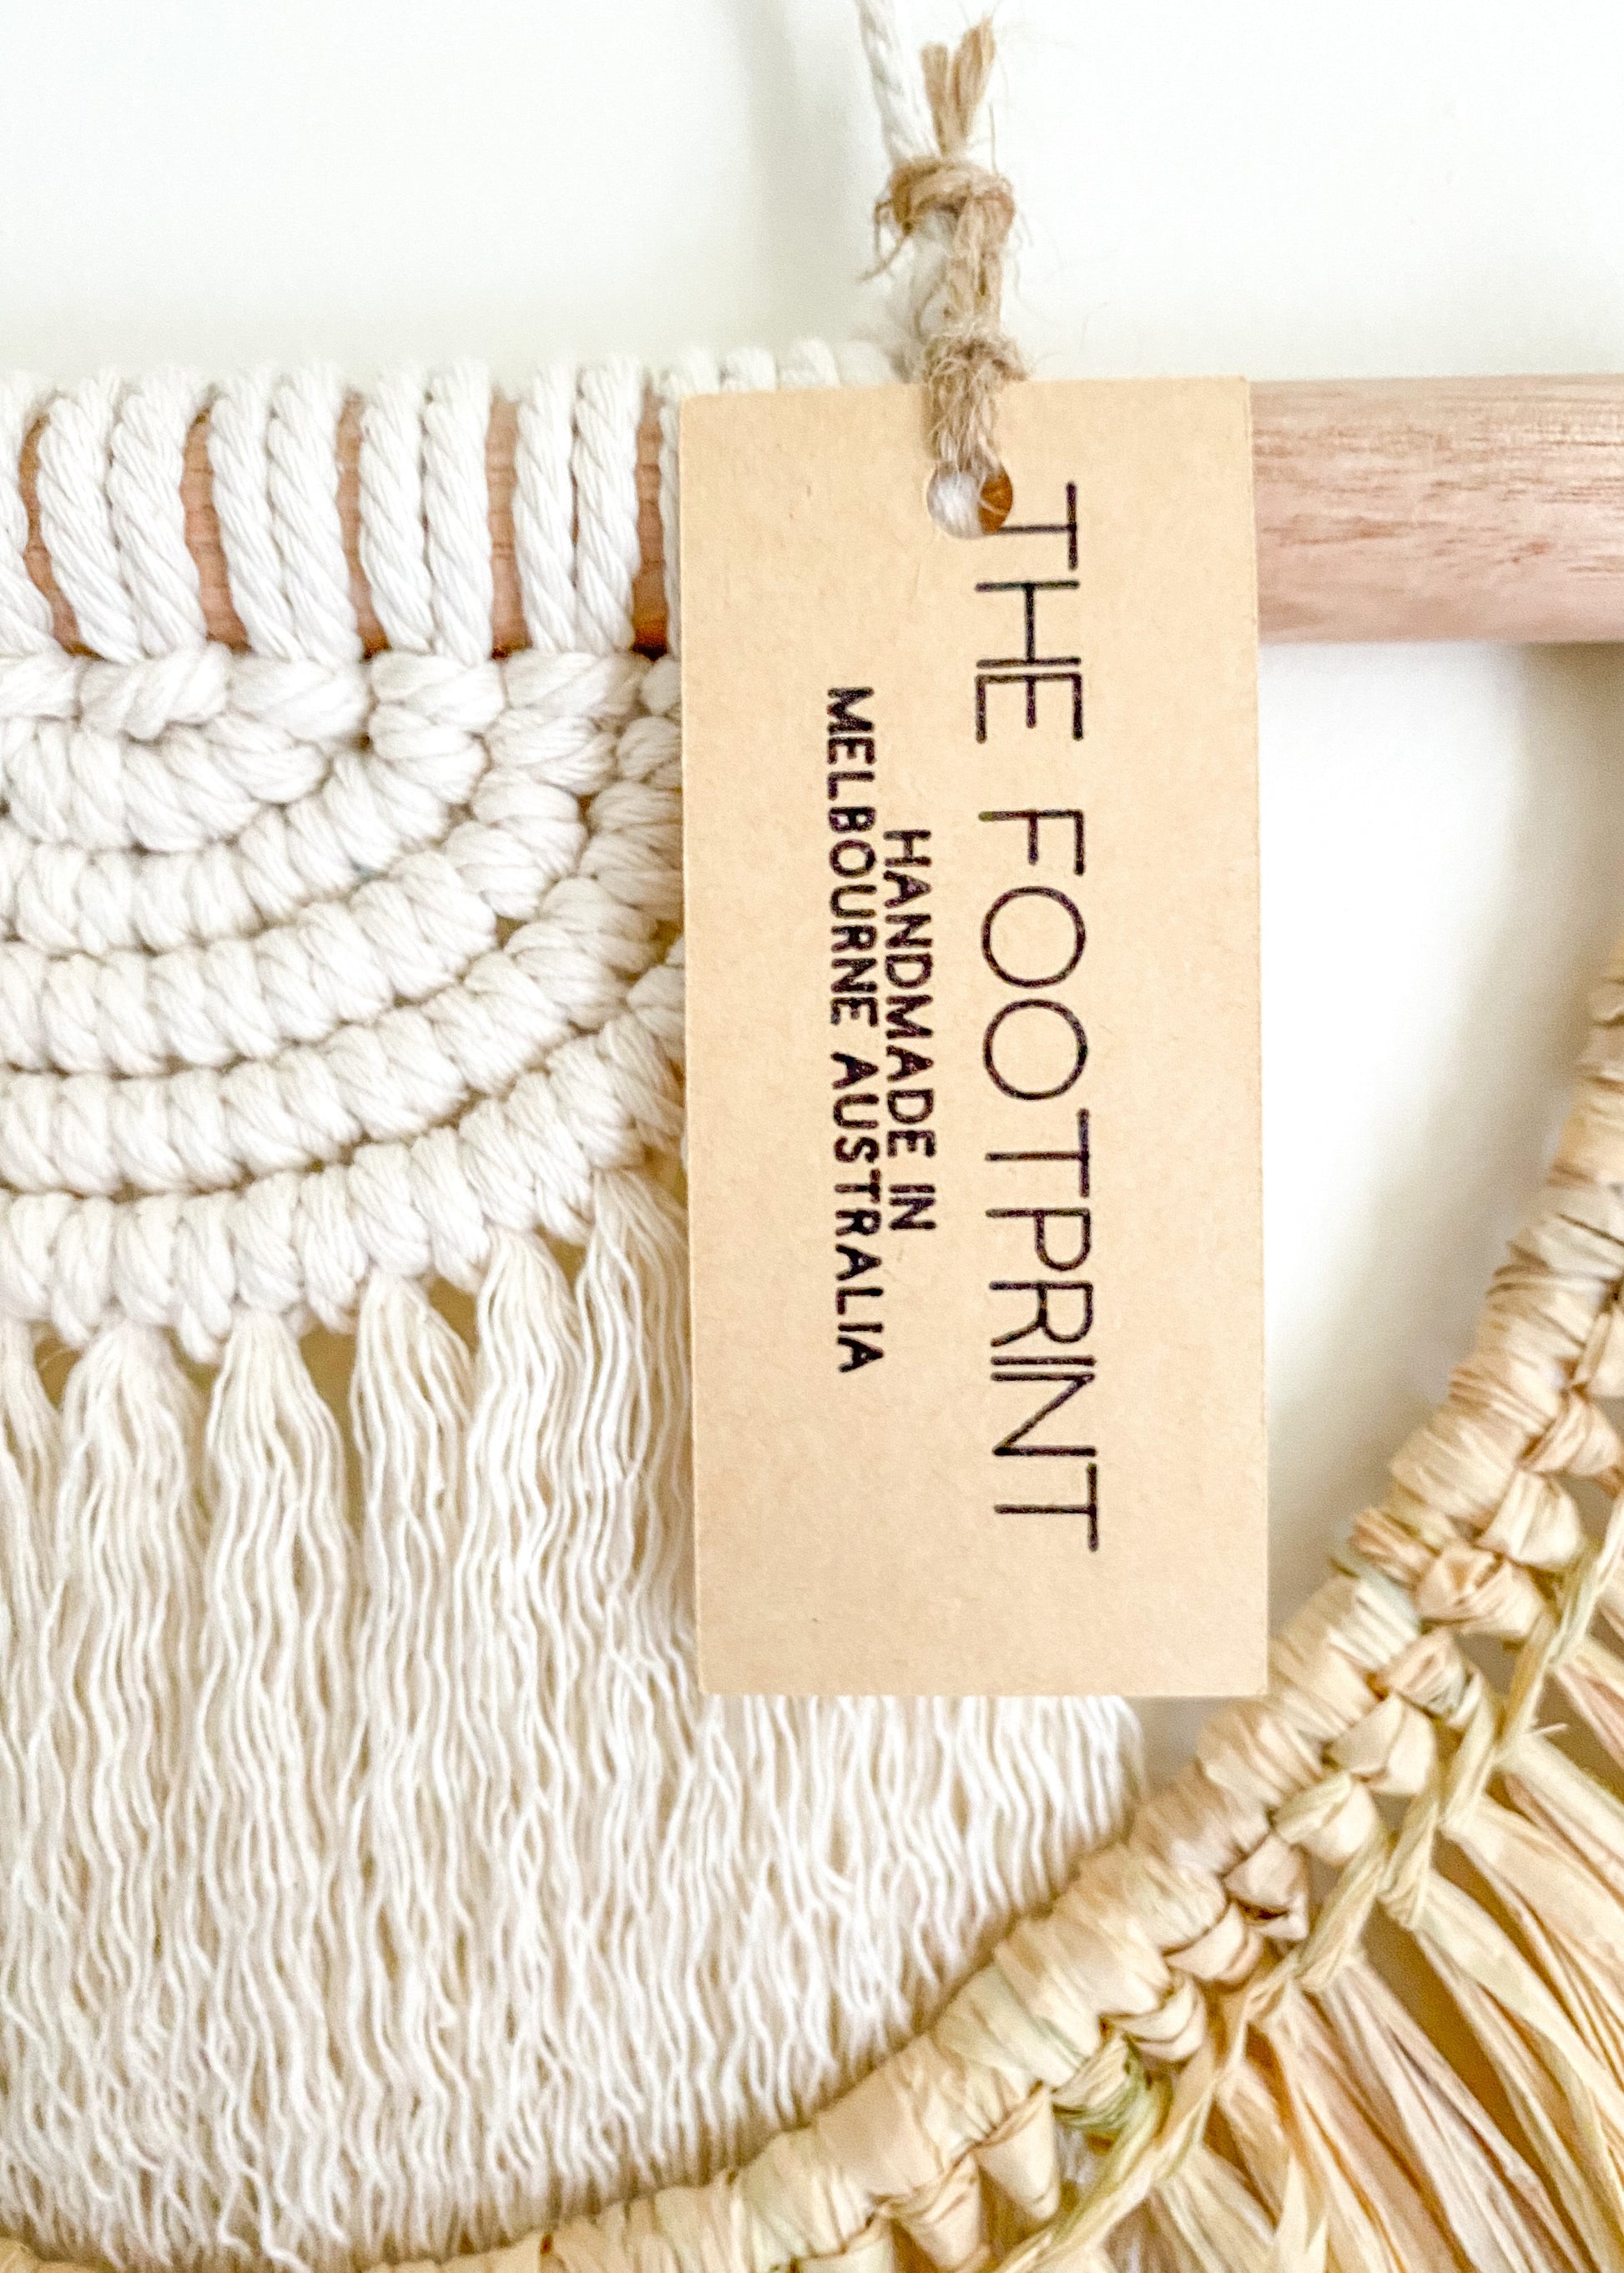 Close up view of the product tag of macrame and raffia wall hanging. Product tag reads - The Footprint: Handmade in Melbourne Australia. 